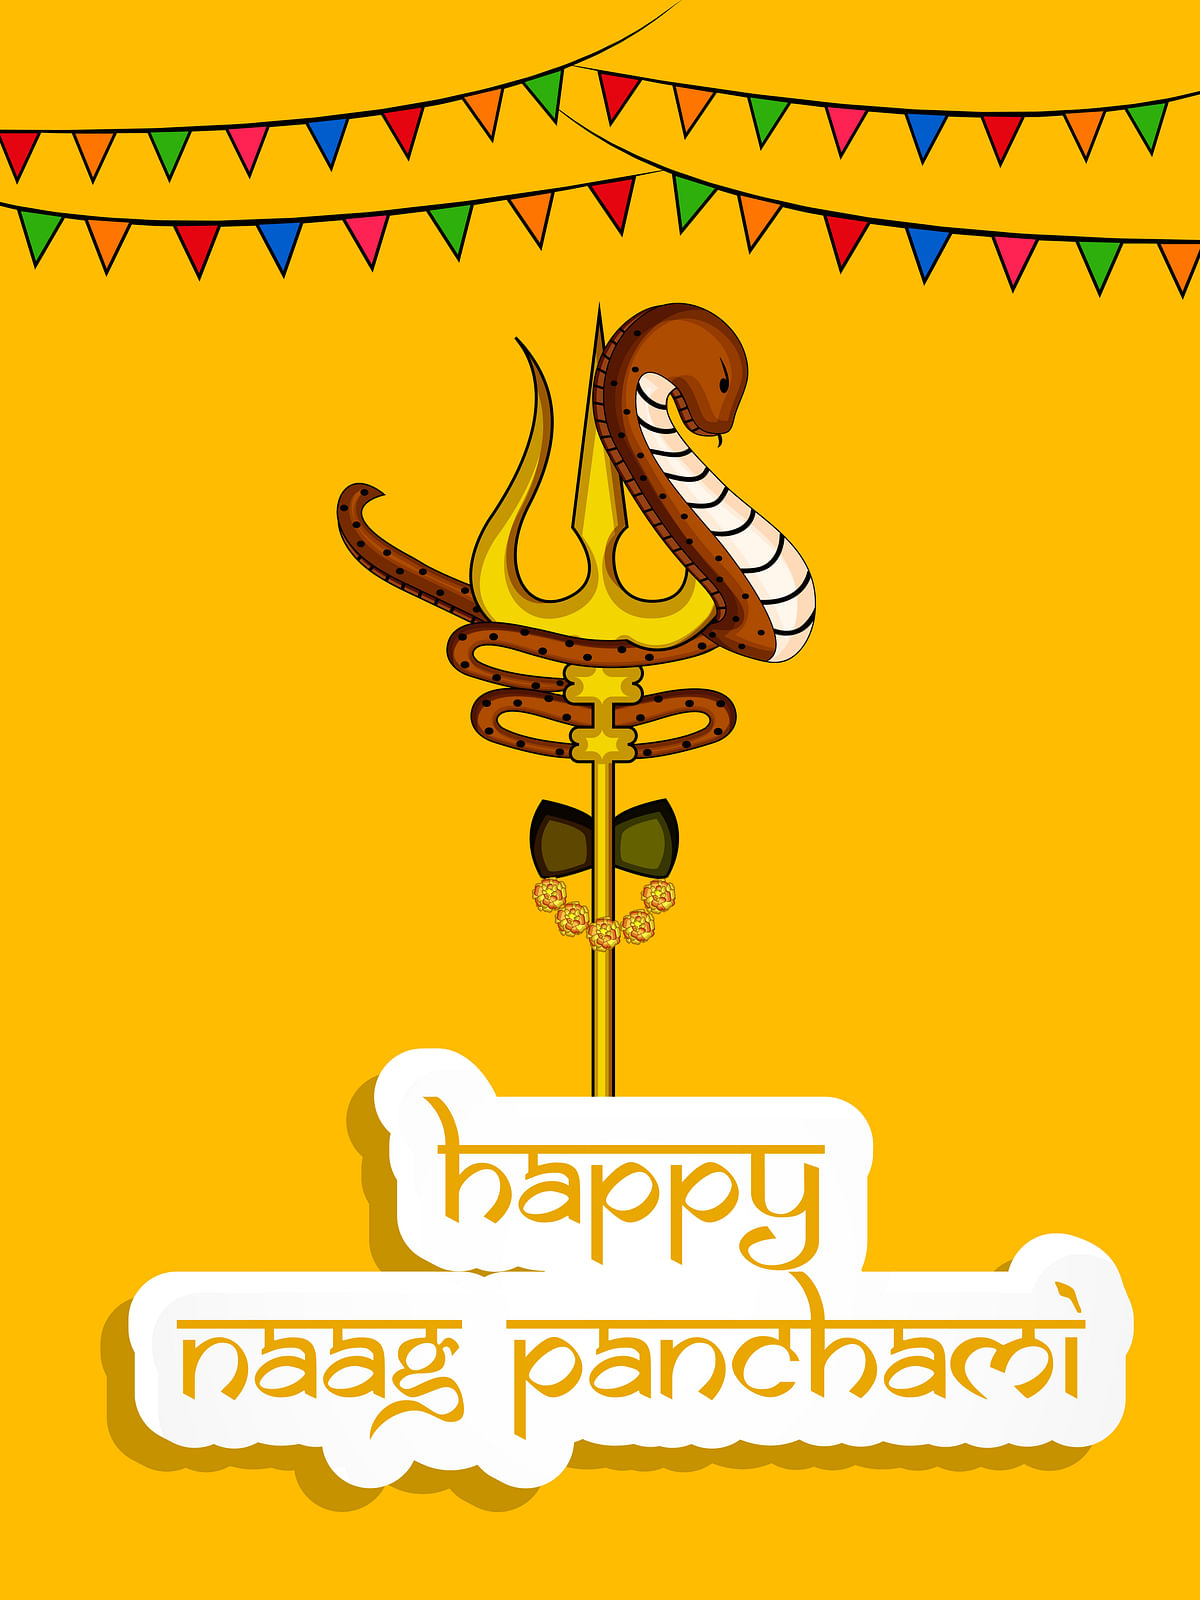 Here are some wishes, images & quotes for you to send your loved ones, this Nag Panchami!